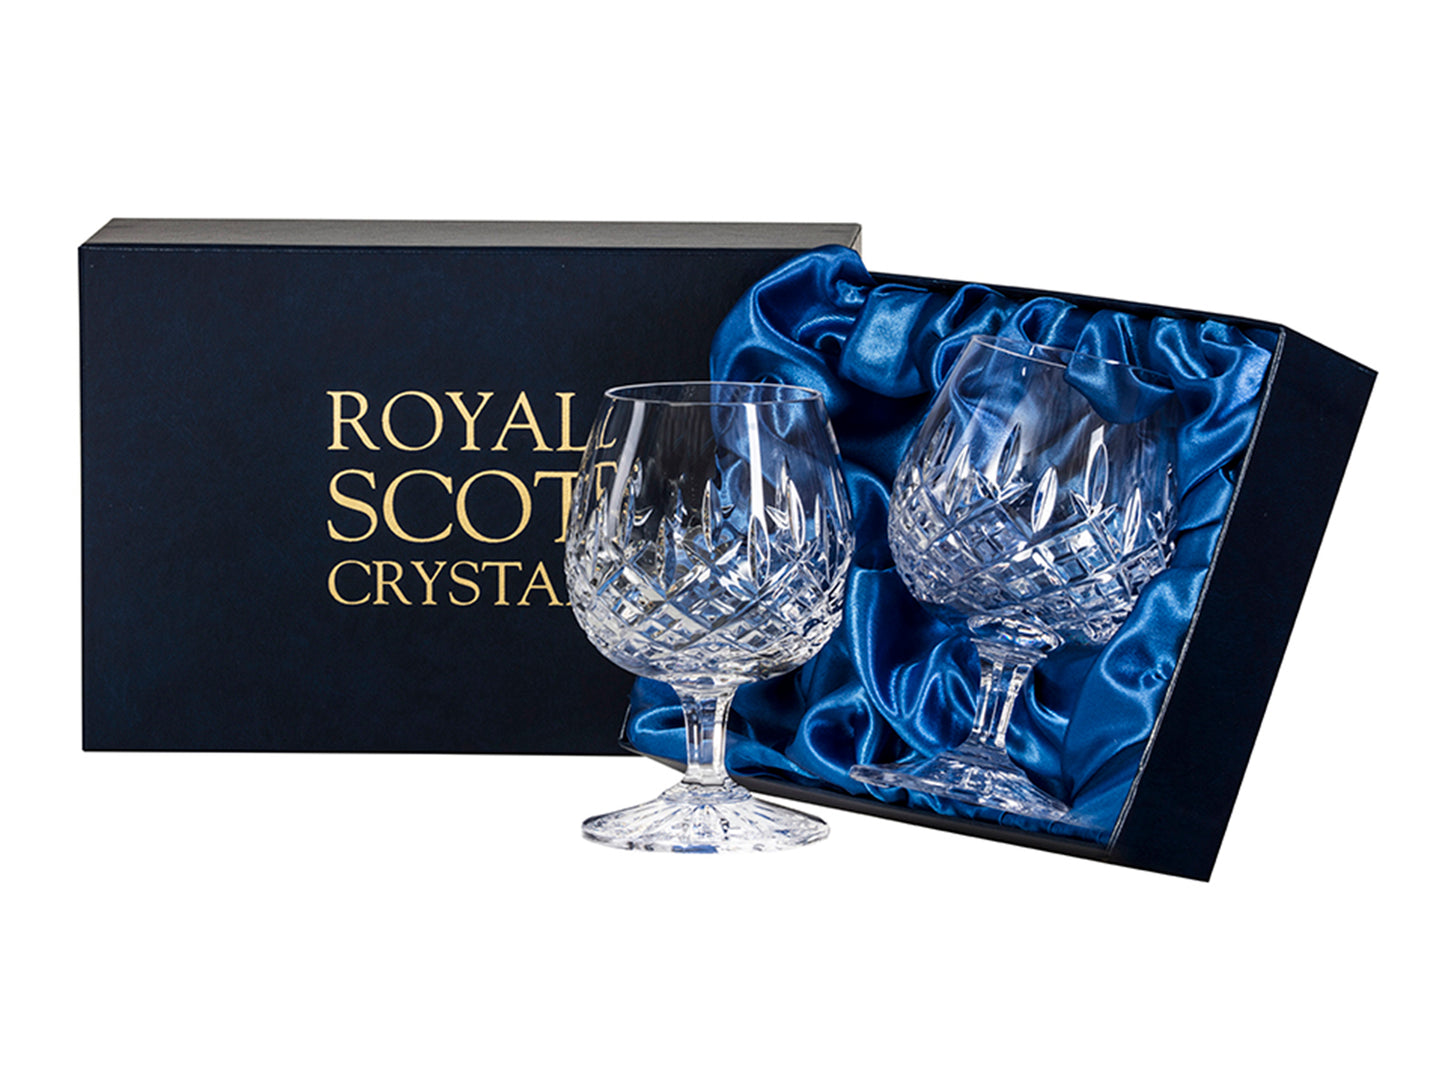 A pair of crystal brandy glasses with short stems and round bowls, cut with a bed of diamonds around the base of the bowl, with single flicks reaching up towards the smooth rim. They come in a navy-blue silk-lined presentation box with gold branding on the lid.